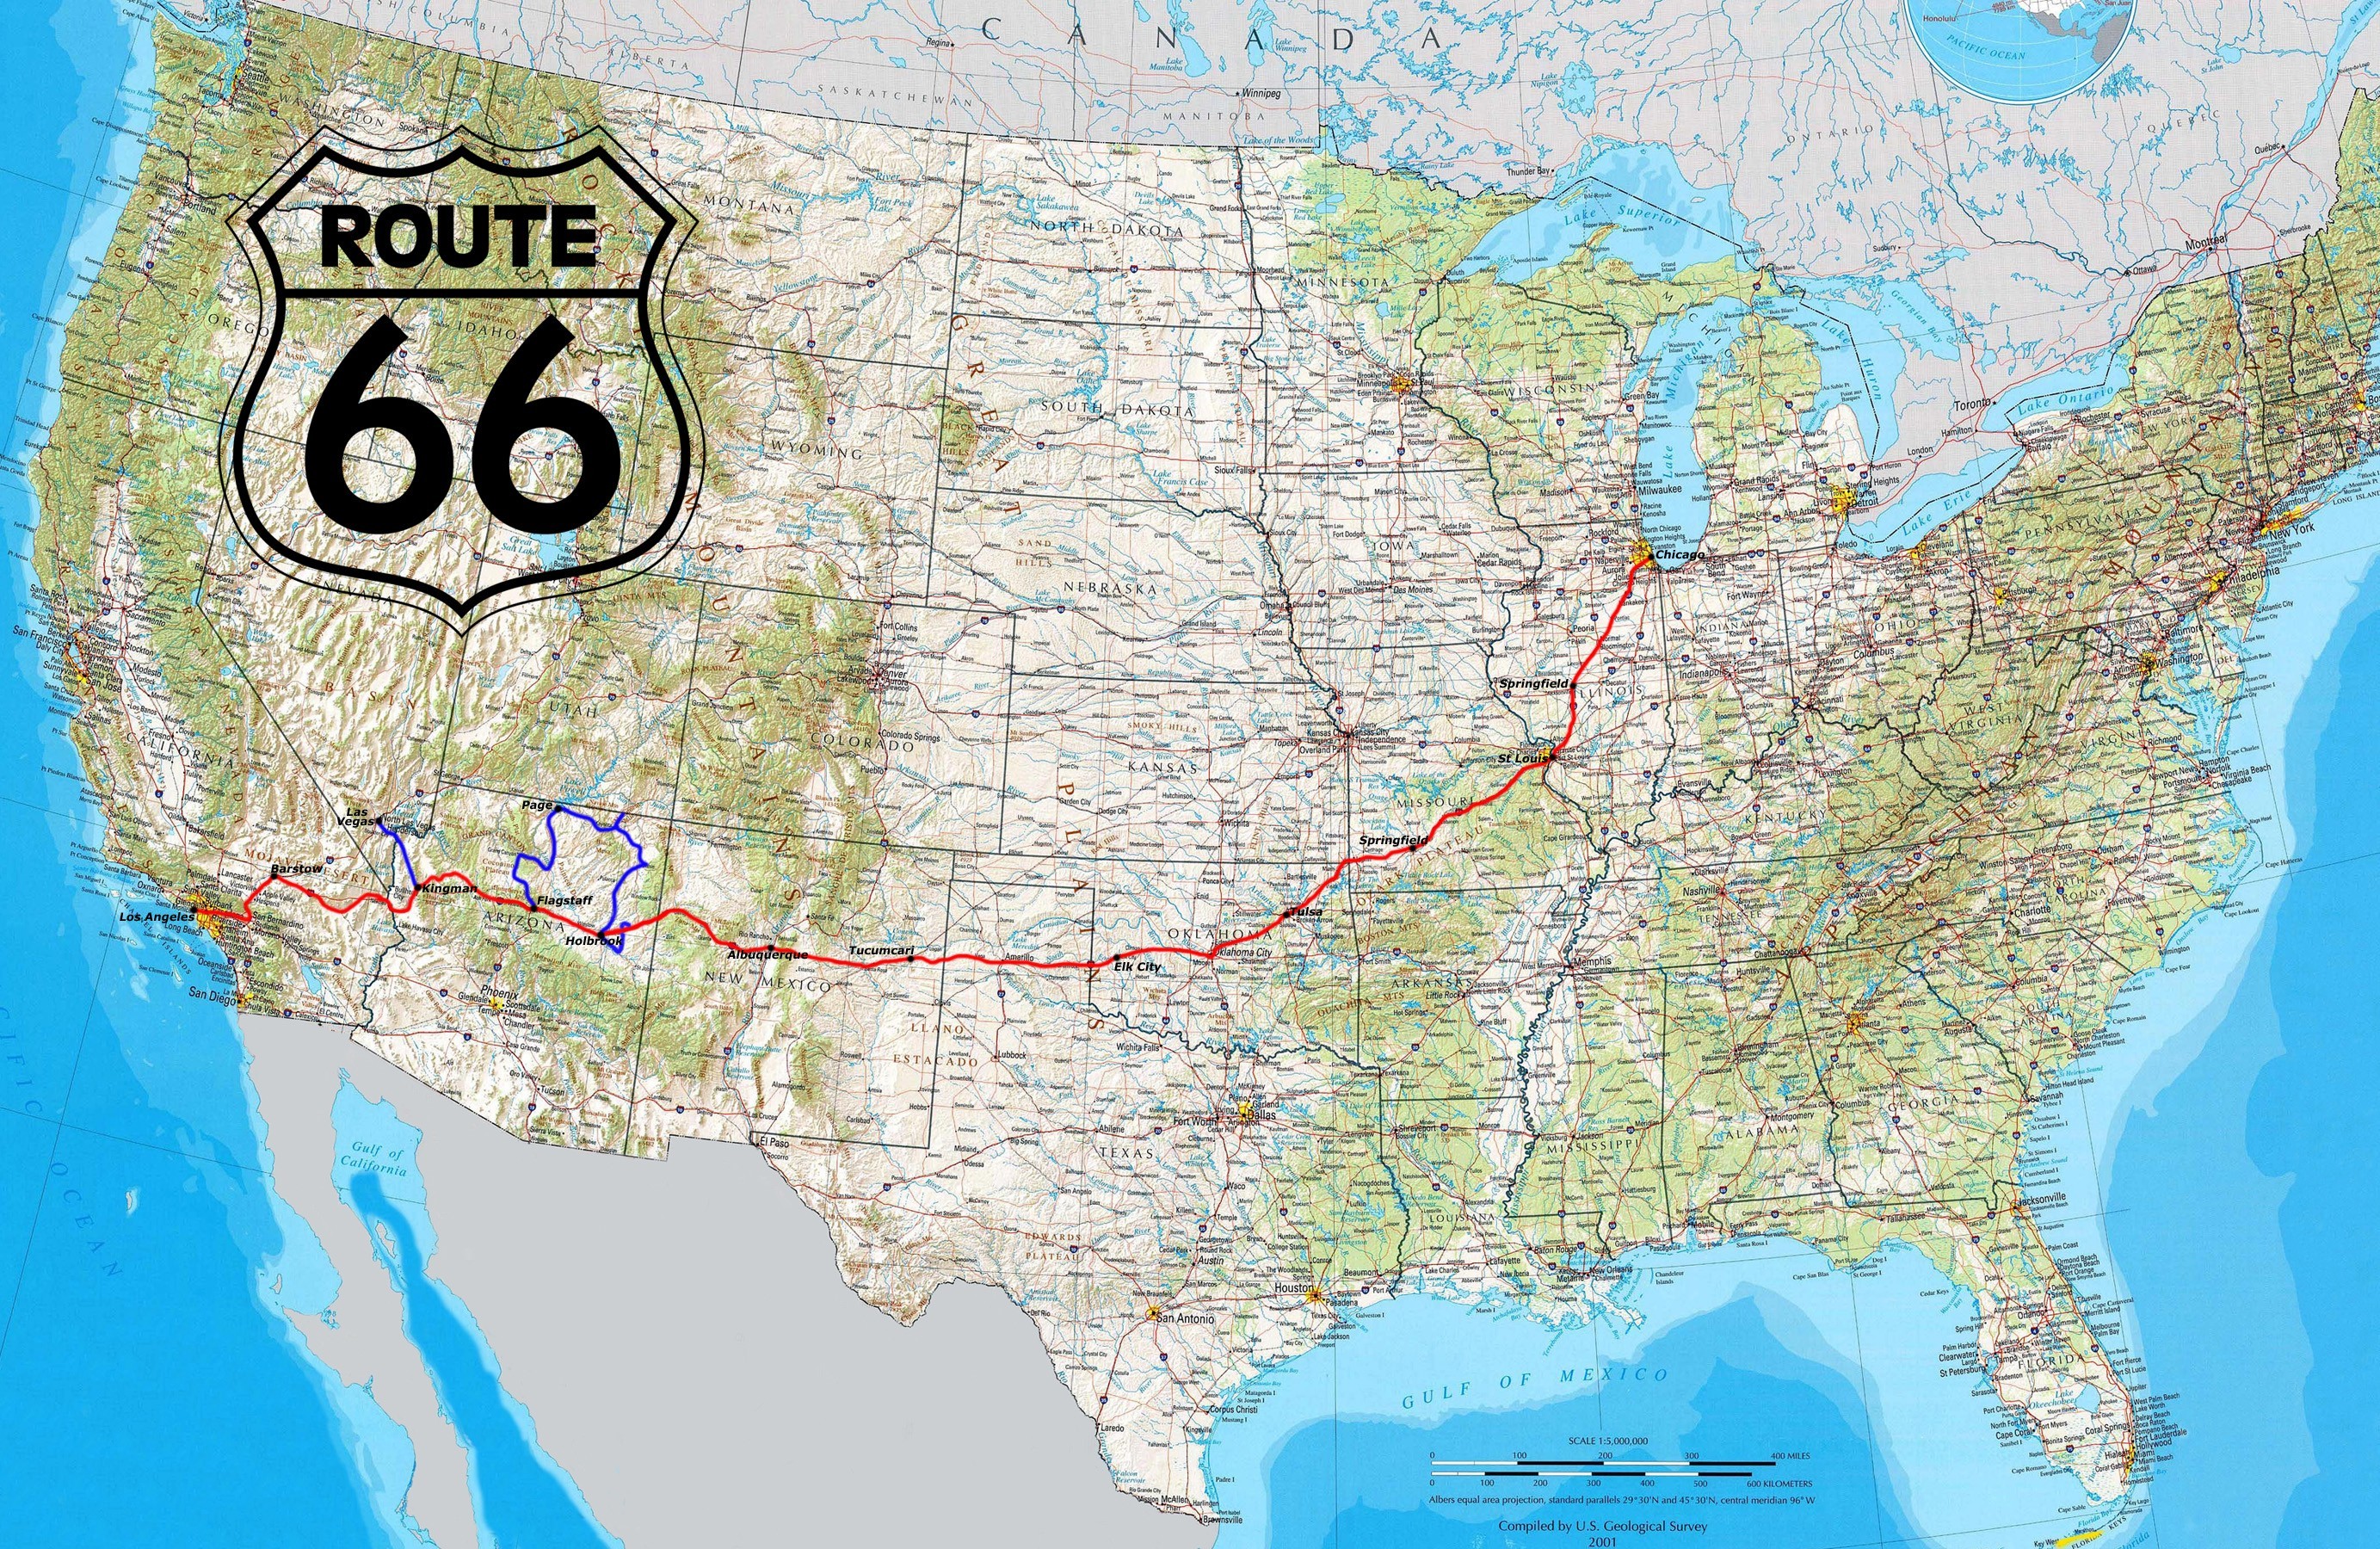 Road Route 66 Usa Highway Map North America Canada Coast Sea Border Wallpapers Hd Desktop And Mobile Backgrounds 2766x1800